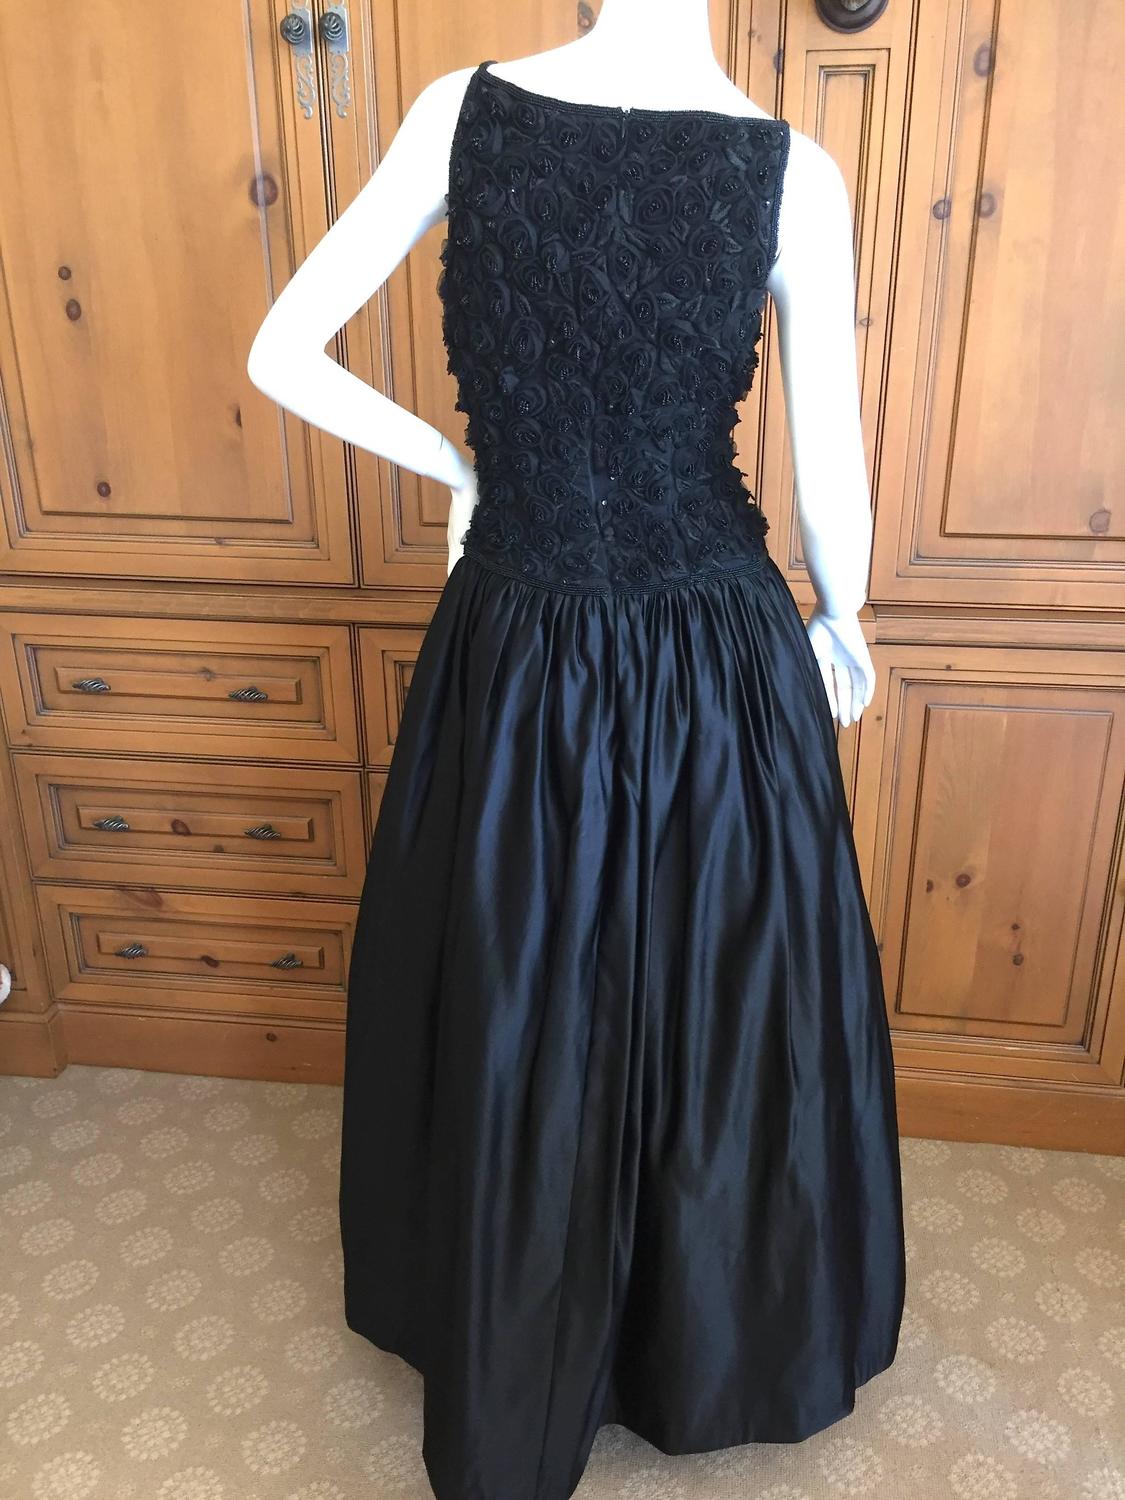 Yves Saint Laurent Numbered Haute Couture Evening Dress at 1stdibs